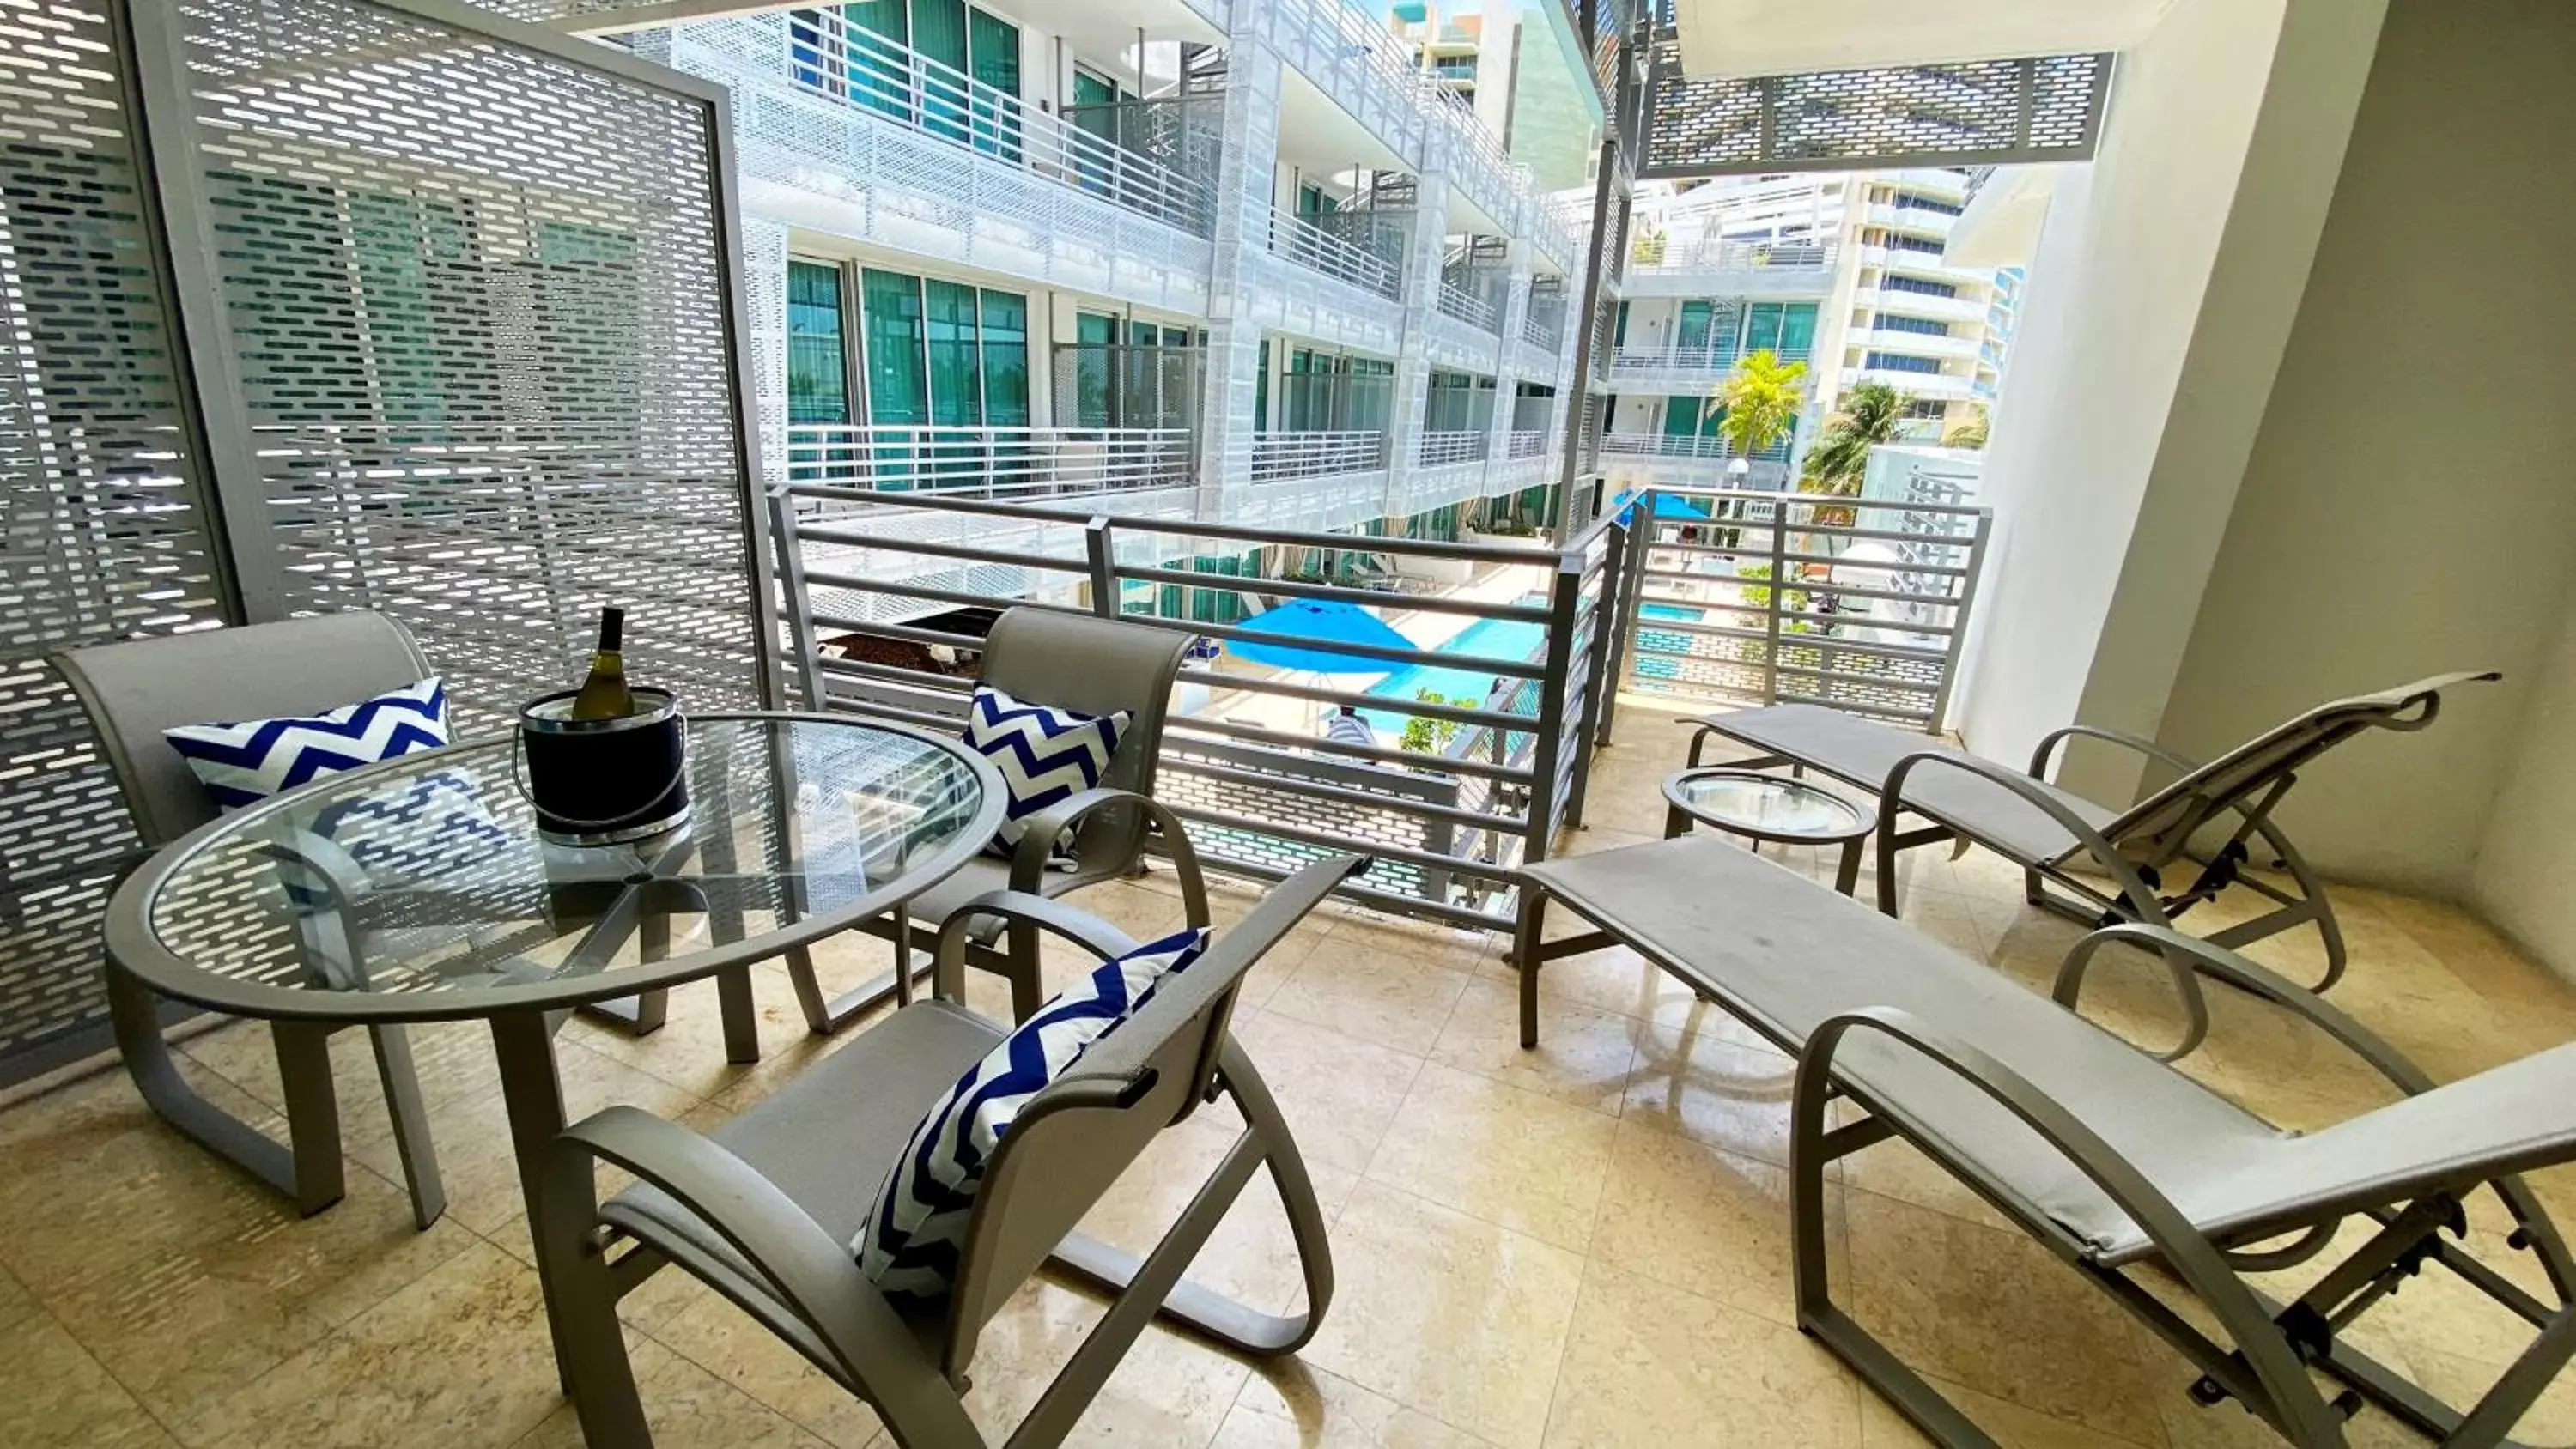 Balcony/Terrace in Boutique Suites 3 min walk to beach